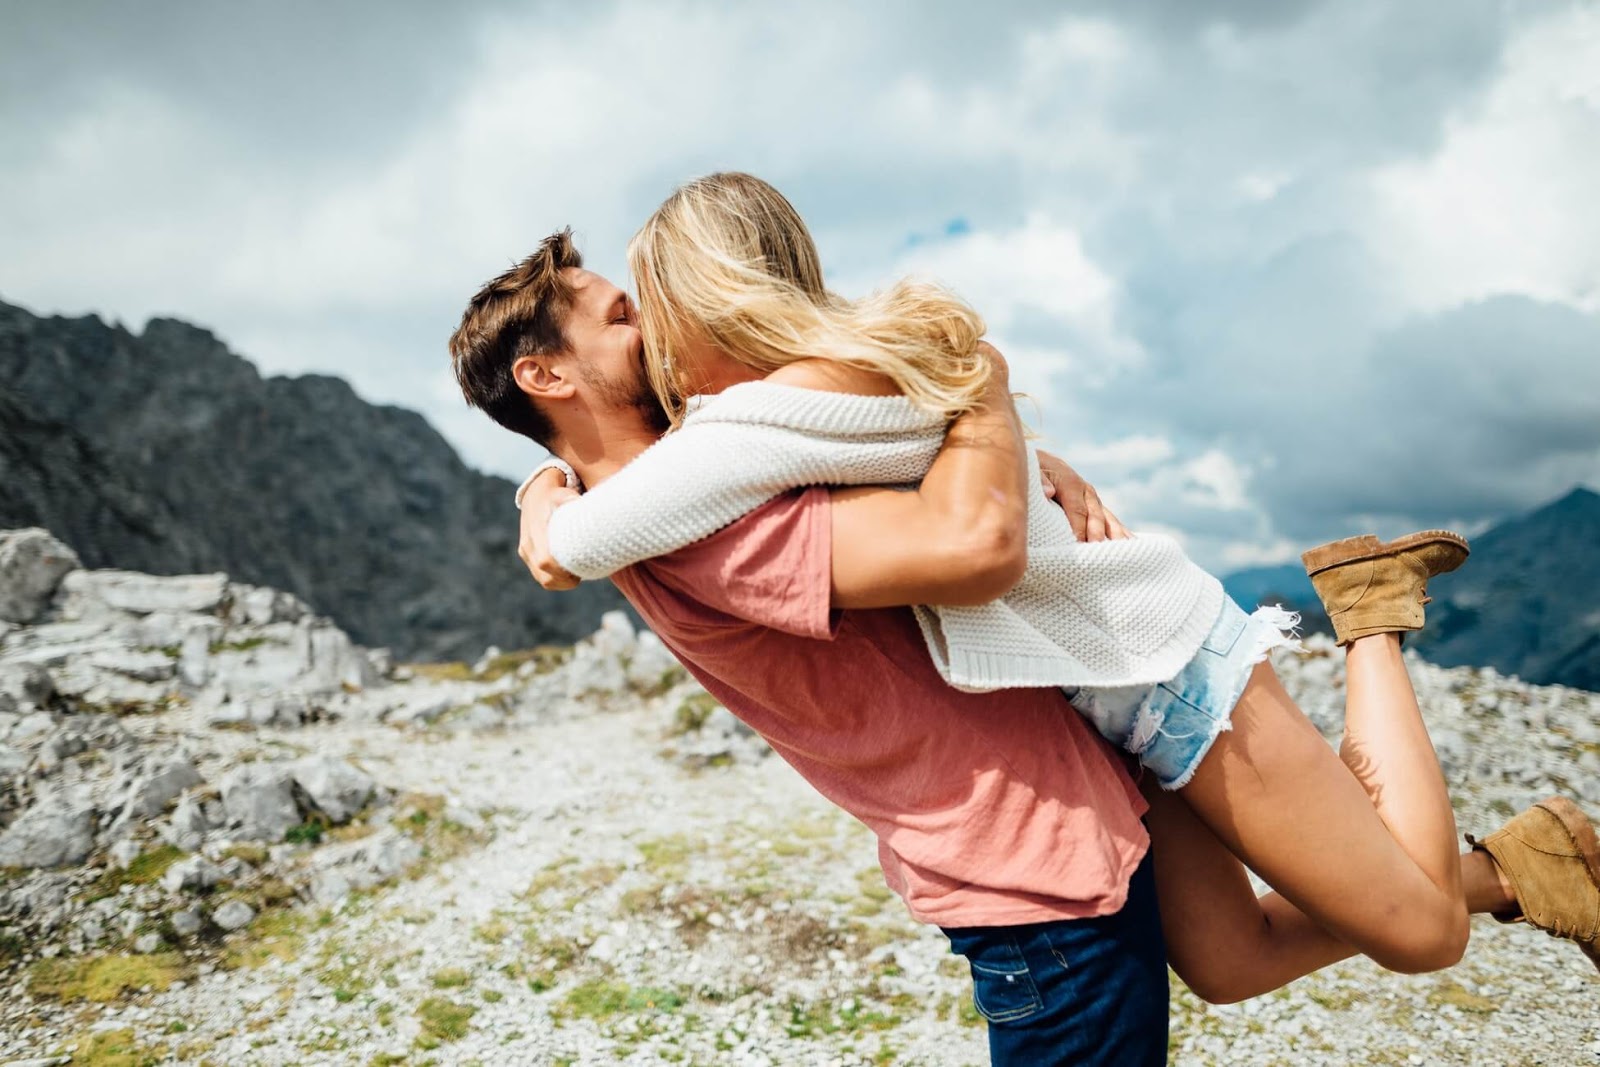 13 Easy Ways To Make Your Woman Happy